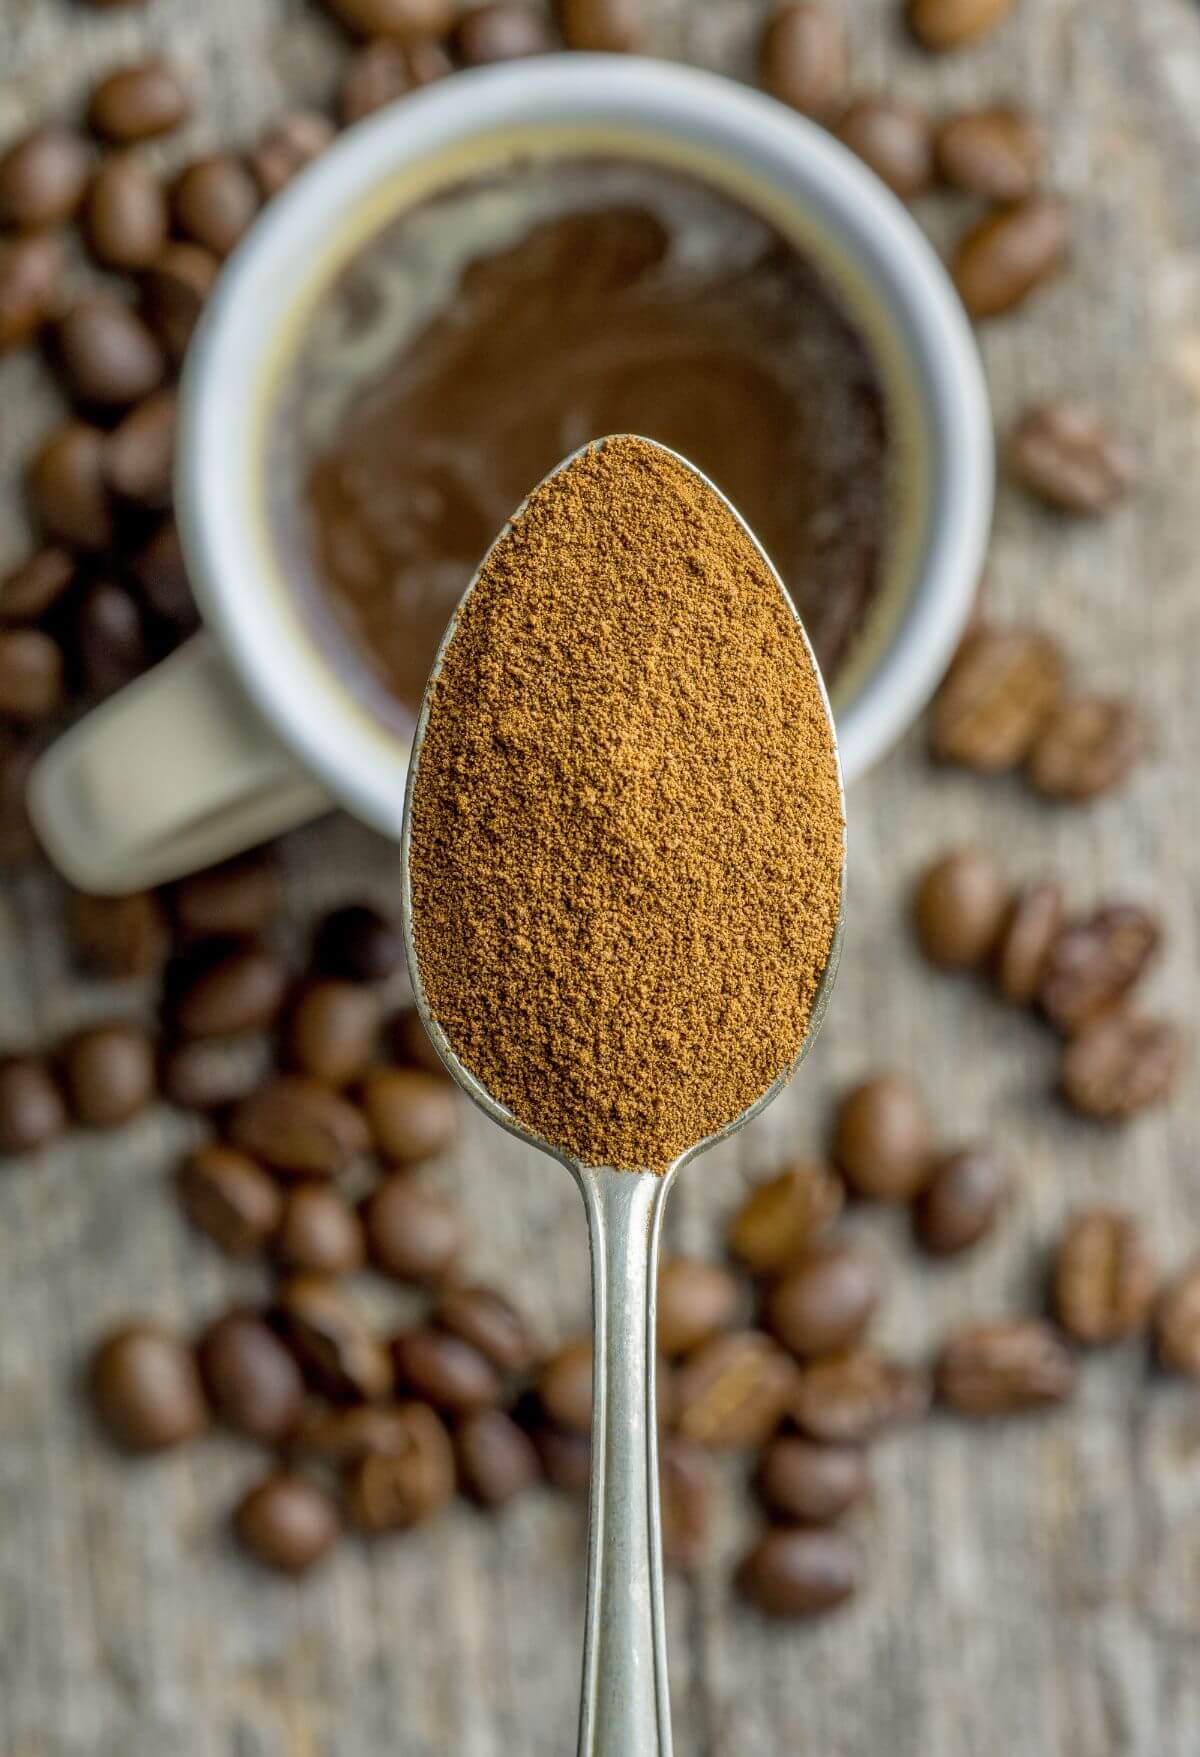 Instant Coffee: Good or Bad for Your Health?